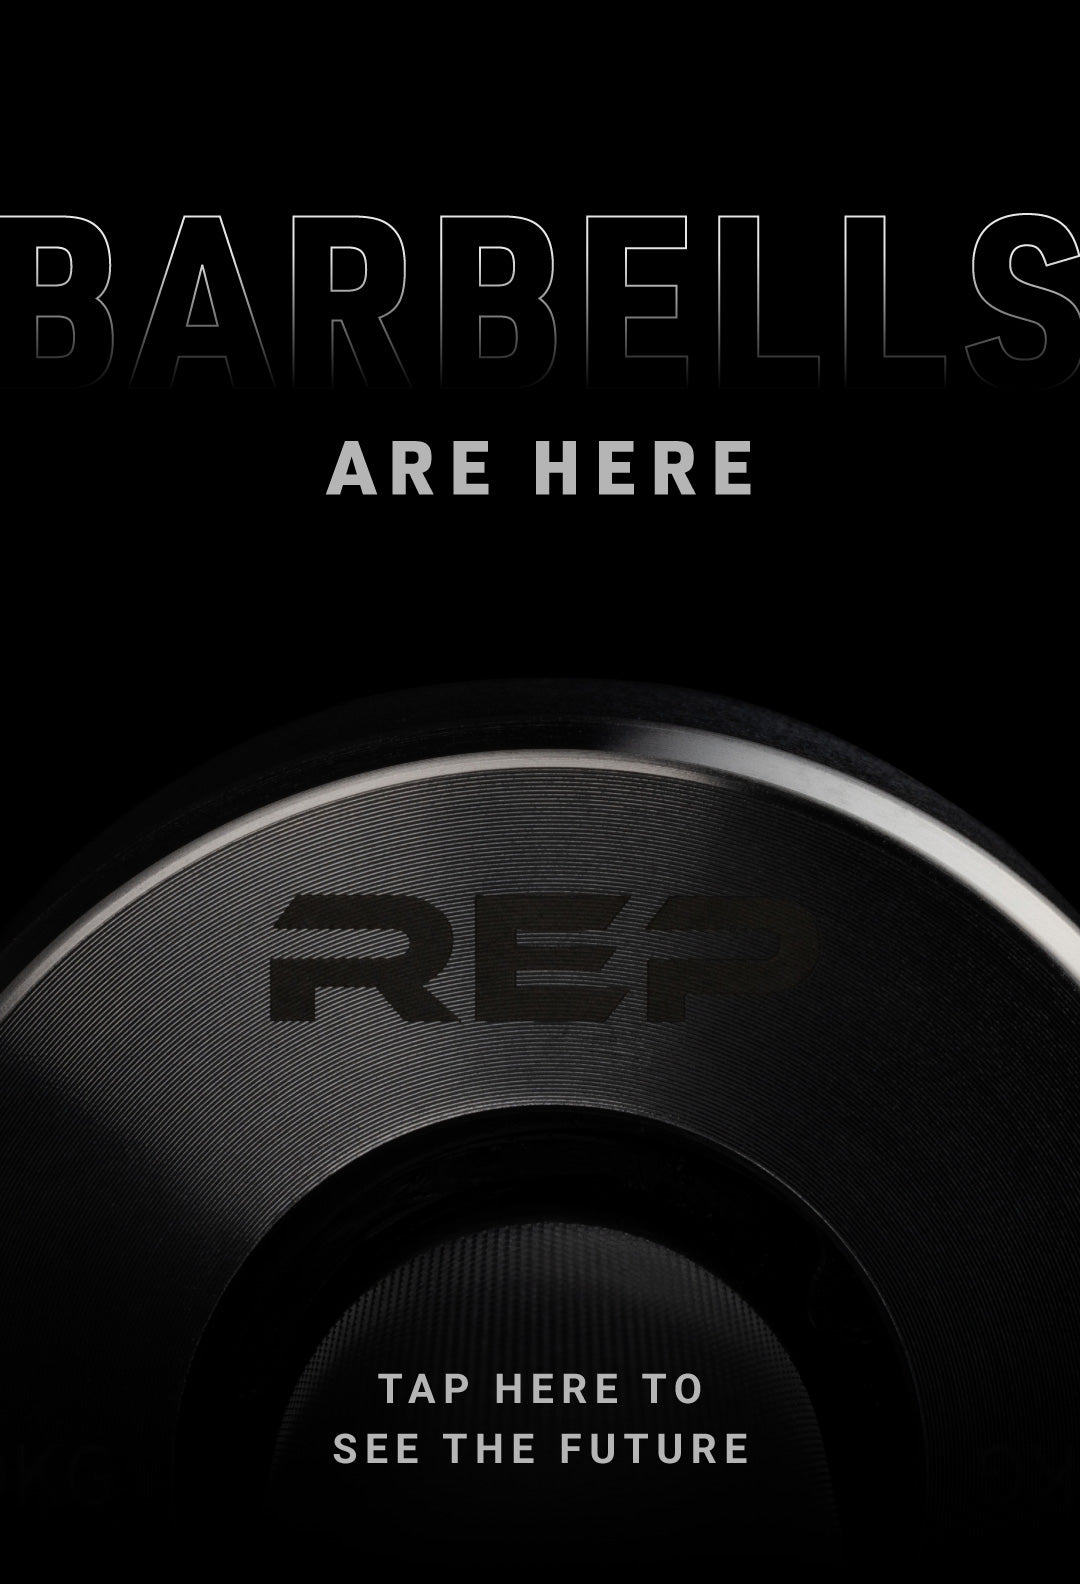  New barbells are here! 